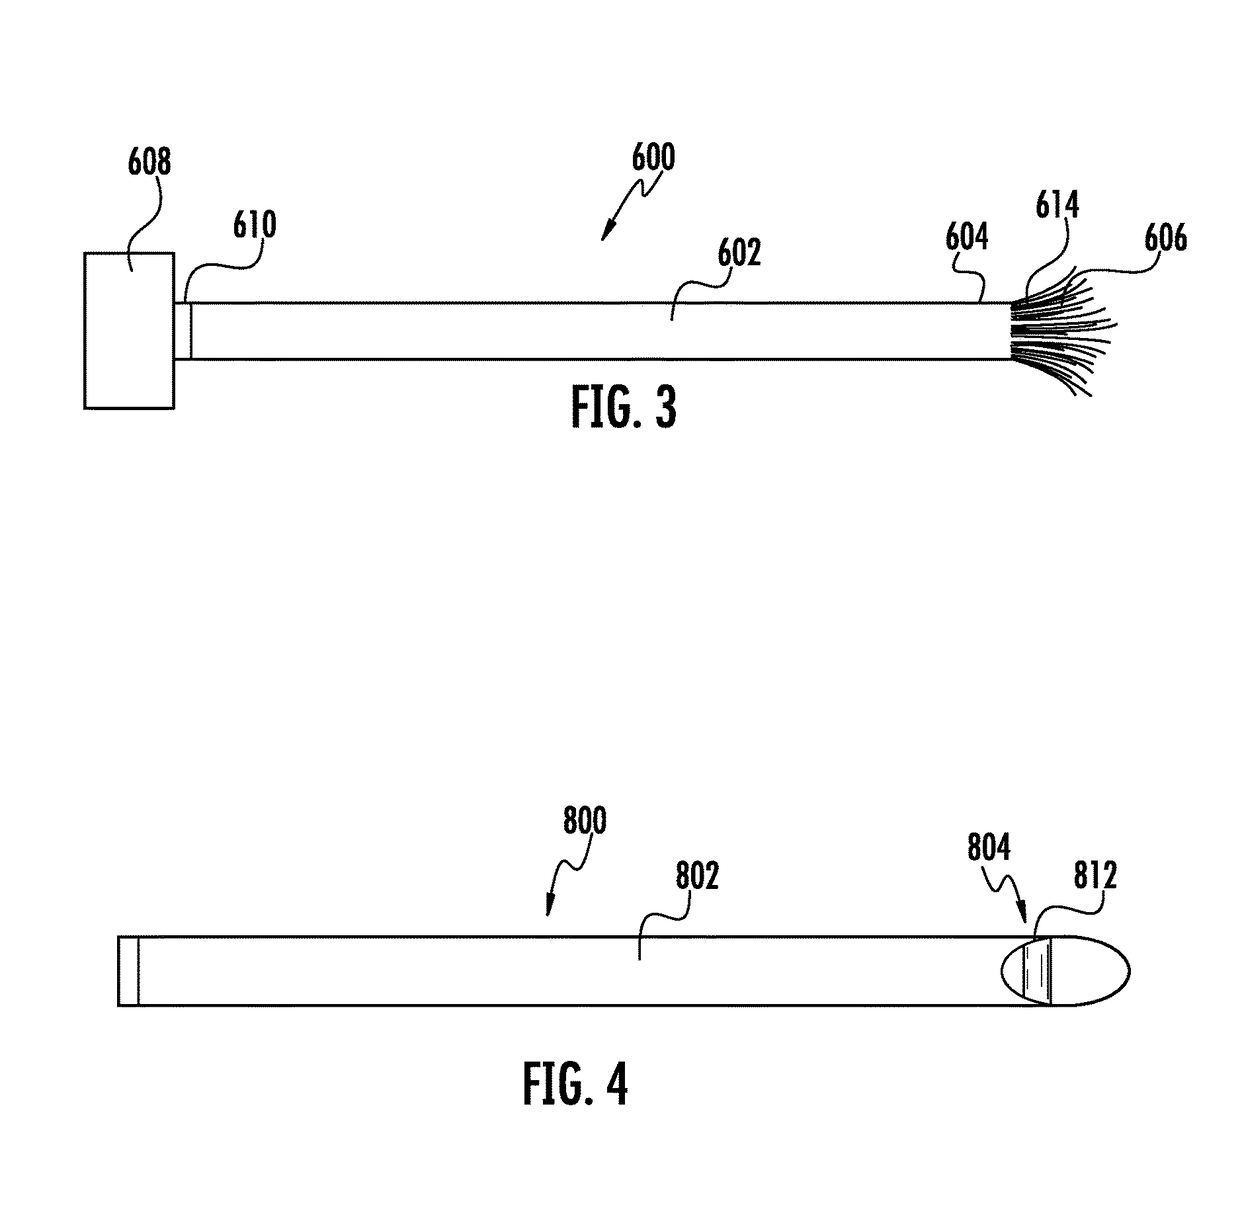 Hernia mesh placement system and method for in-situ surgical applications